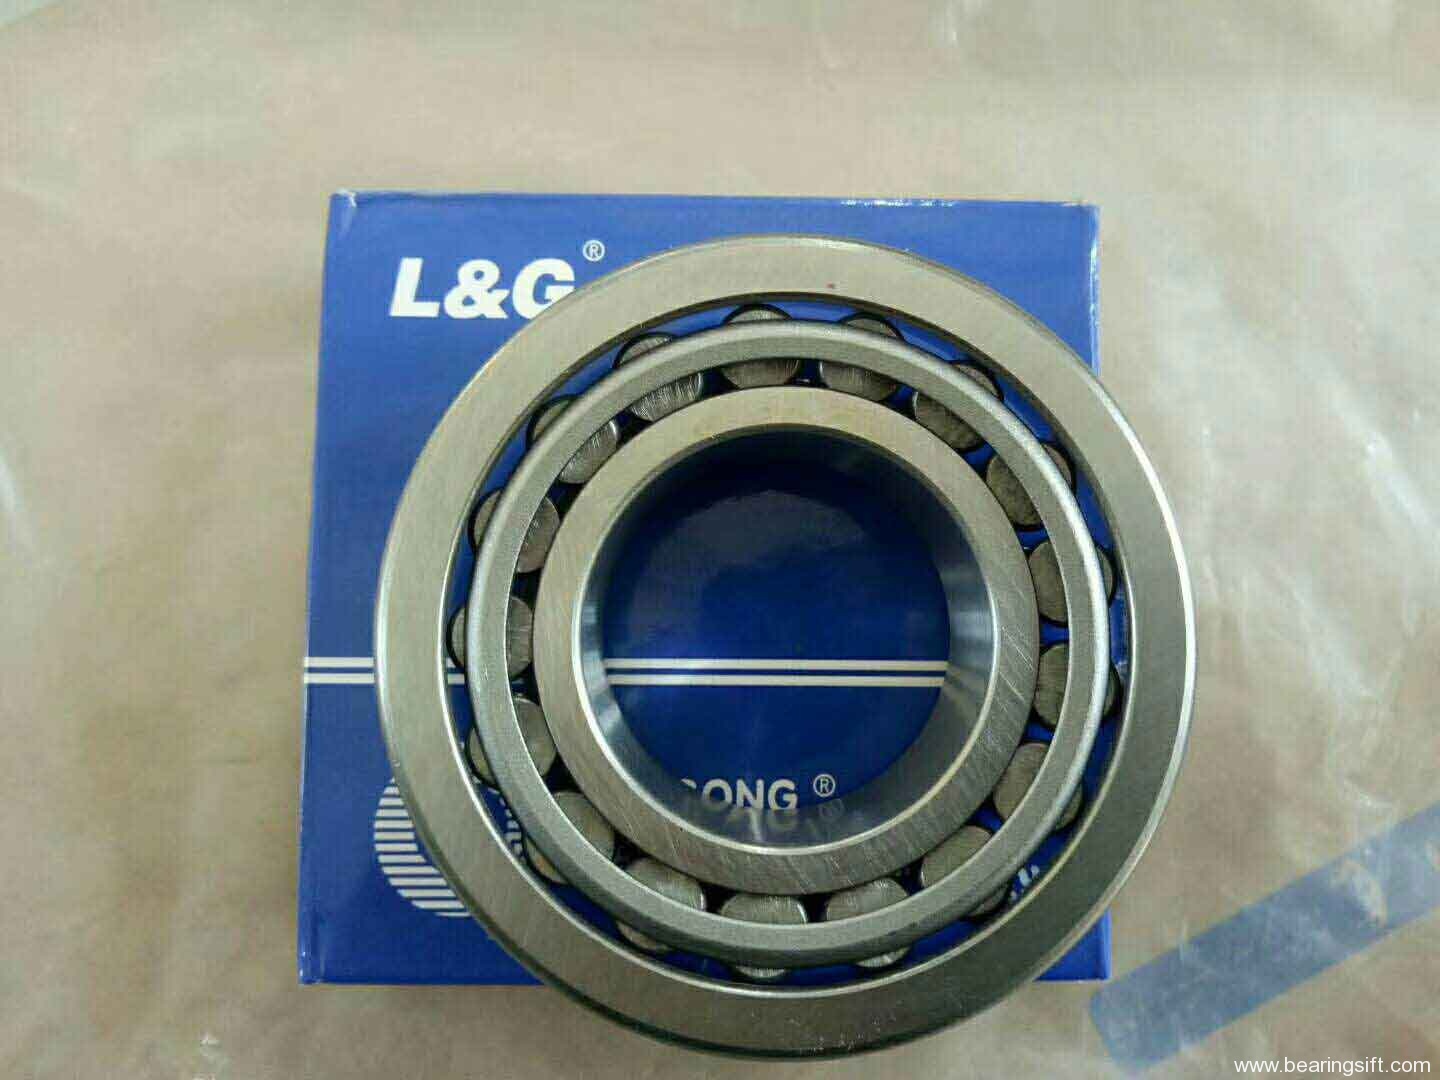 LG Tapered roller bearing - Welcome